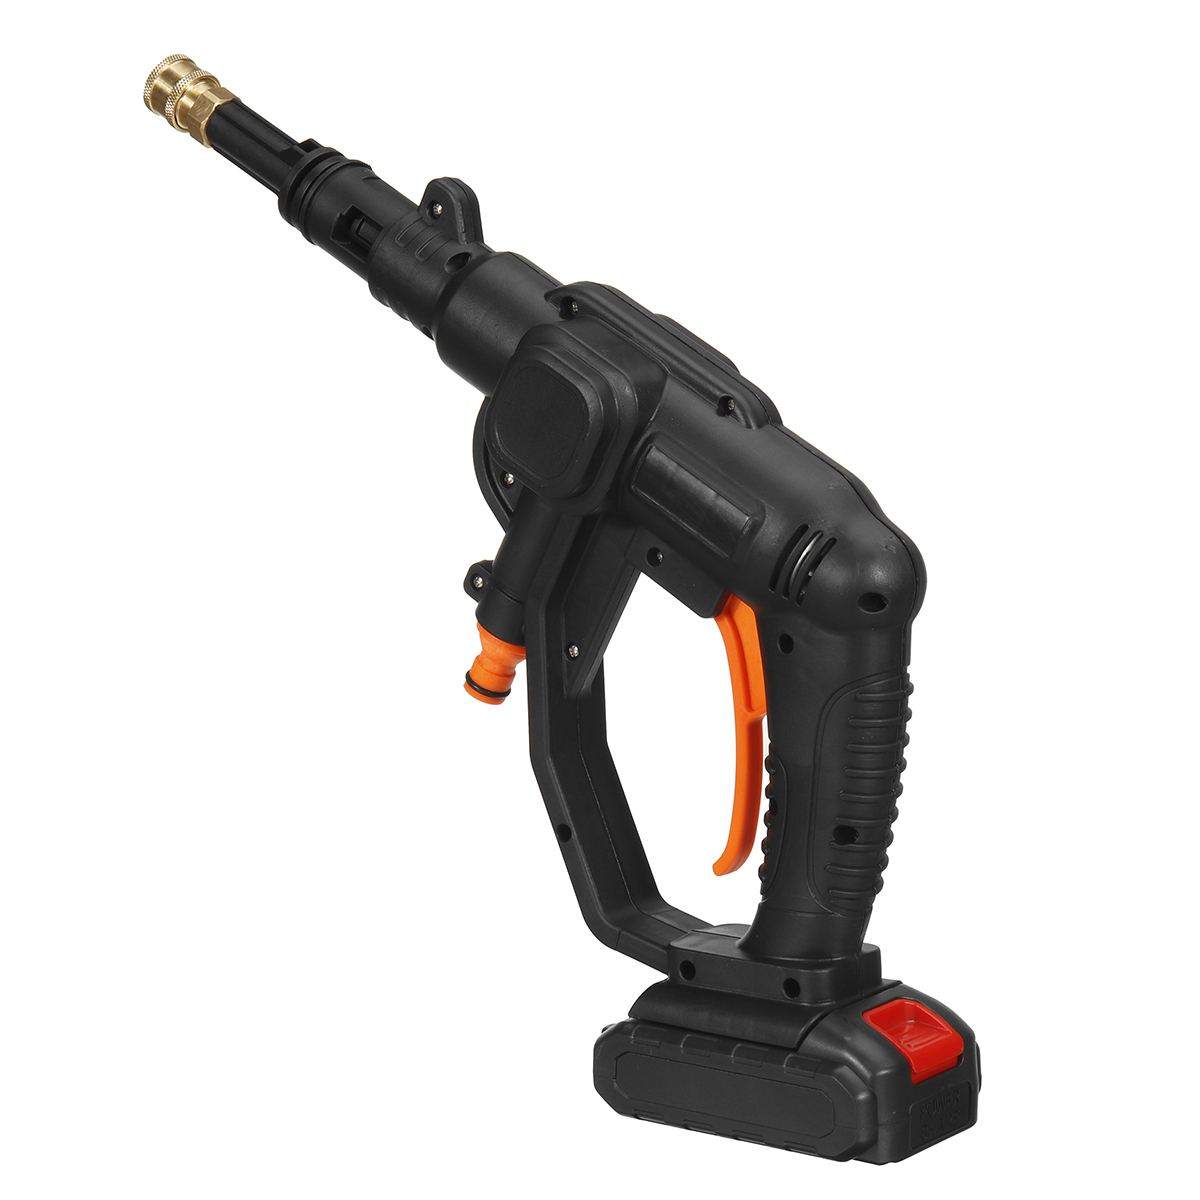 24V 520W High Pressure Cordless Washer Spray Water Cleaner with Battery